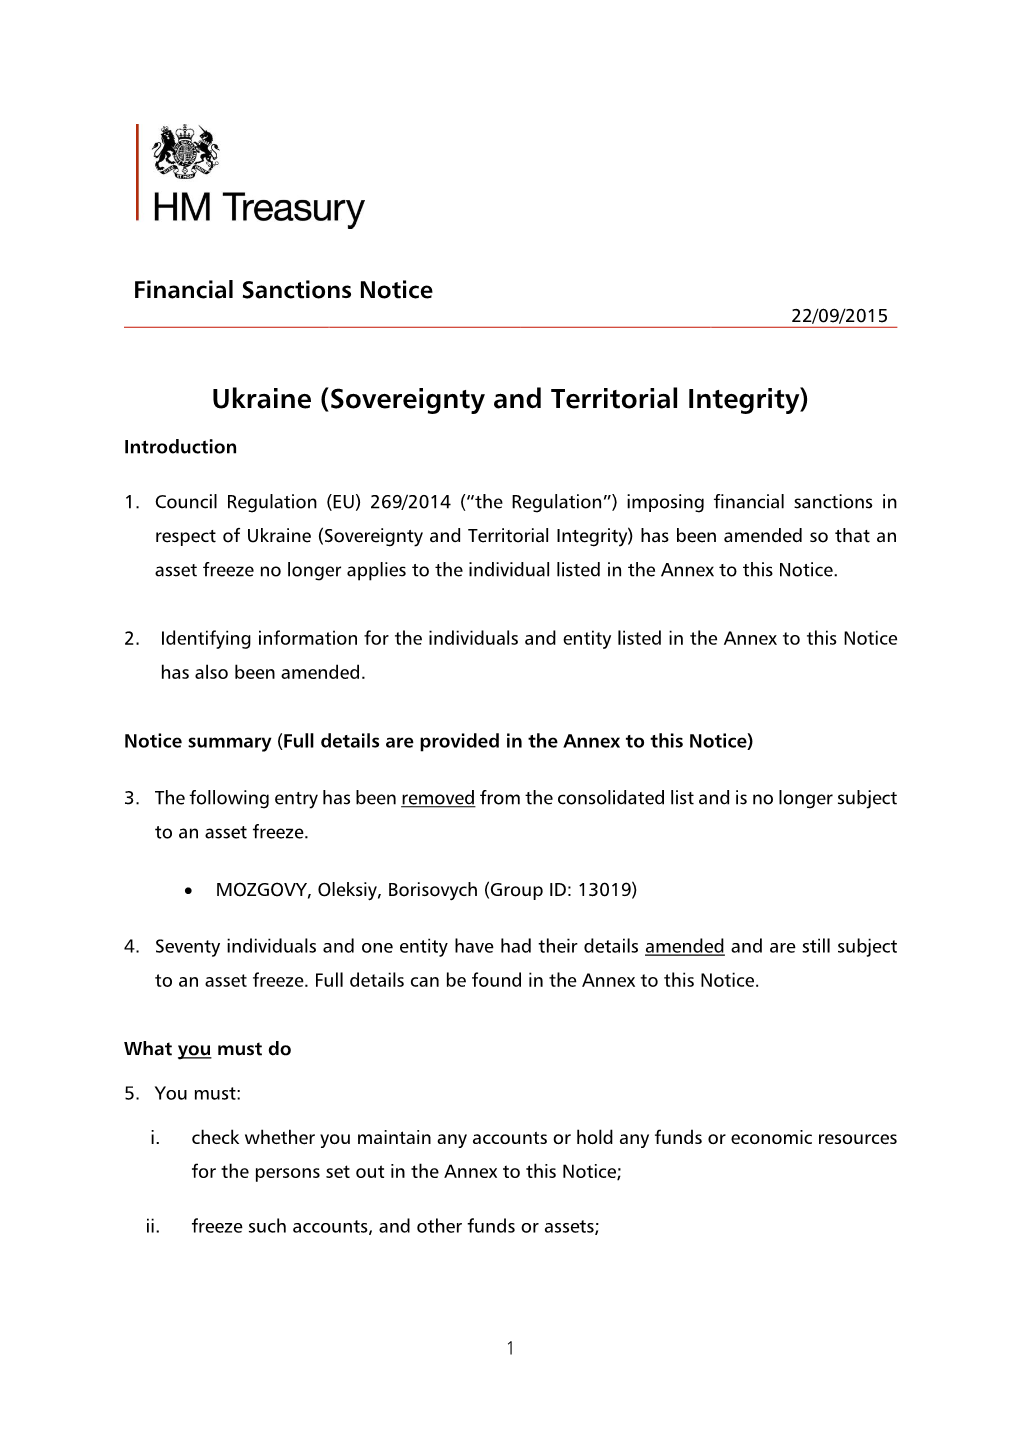 FINANCIAL SANCTIONS: UKRAINE (SOVEREIGNTY and TERRITORIAL INTEGRITY) COUNCIL IMPLEMENTING REGULATION (EU) No 2015/1514